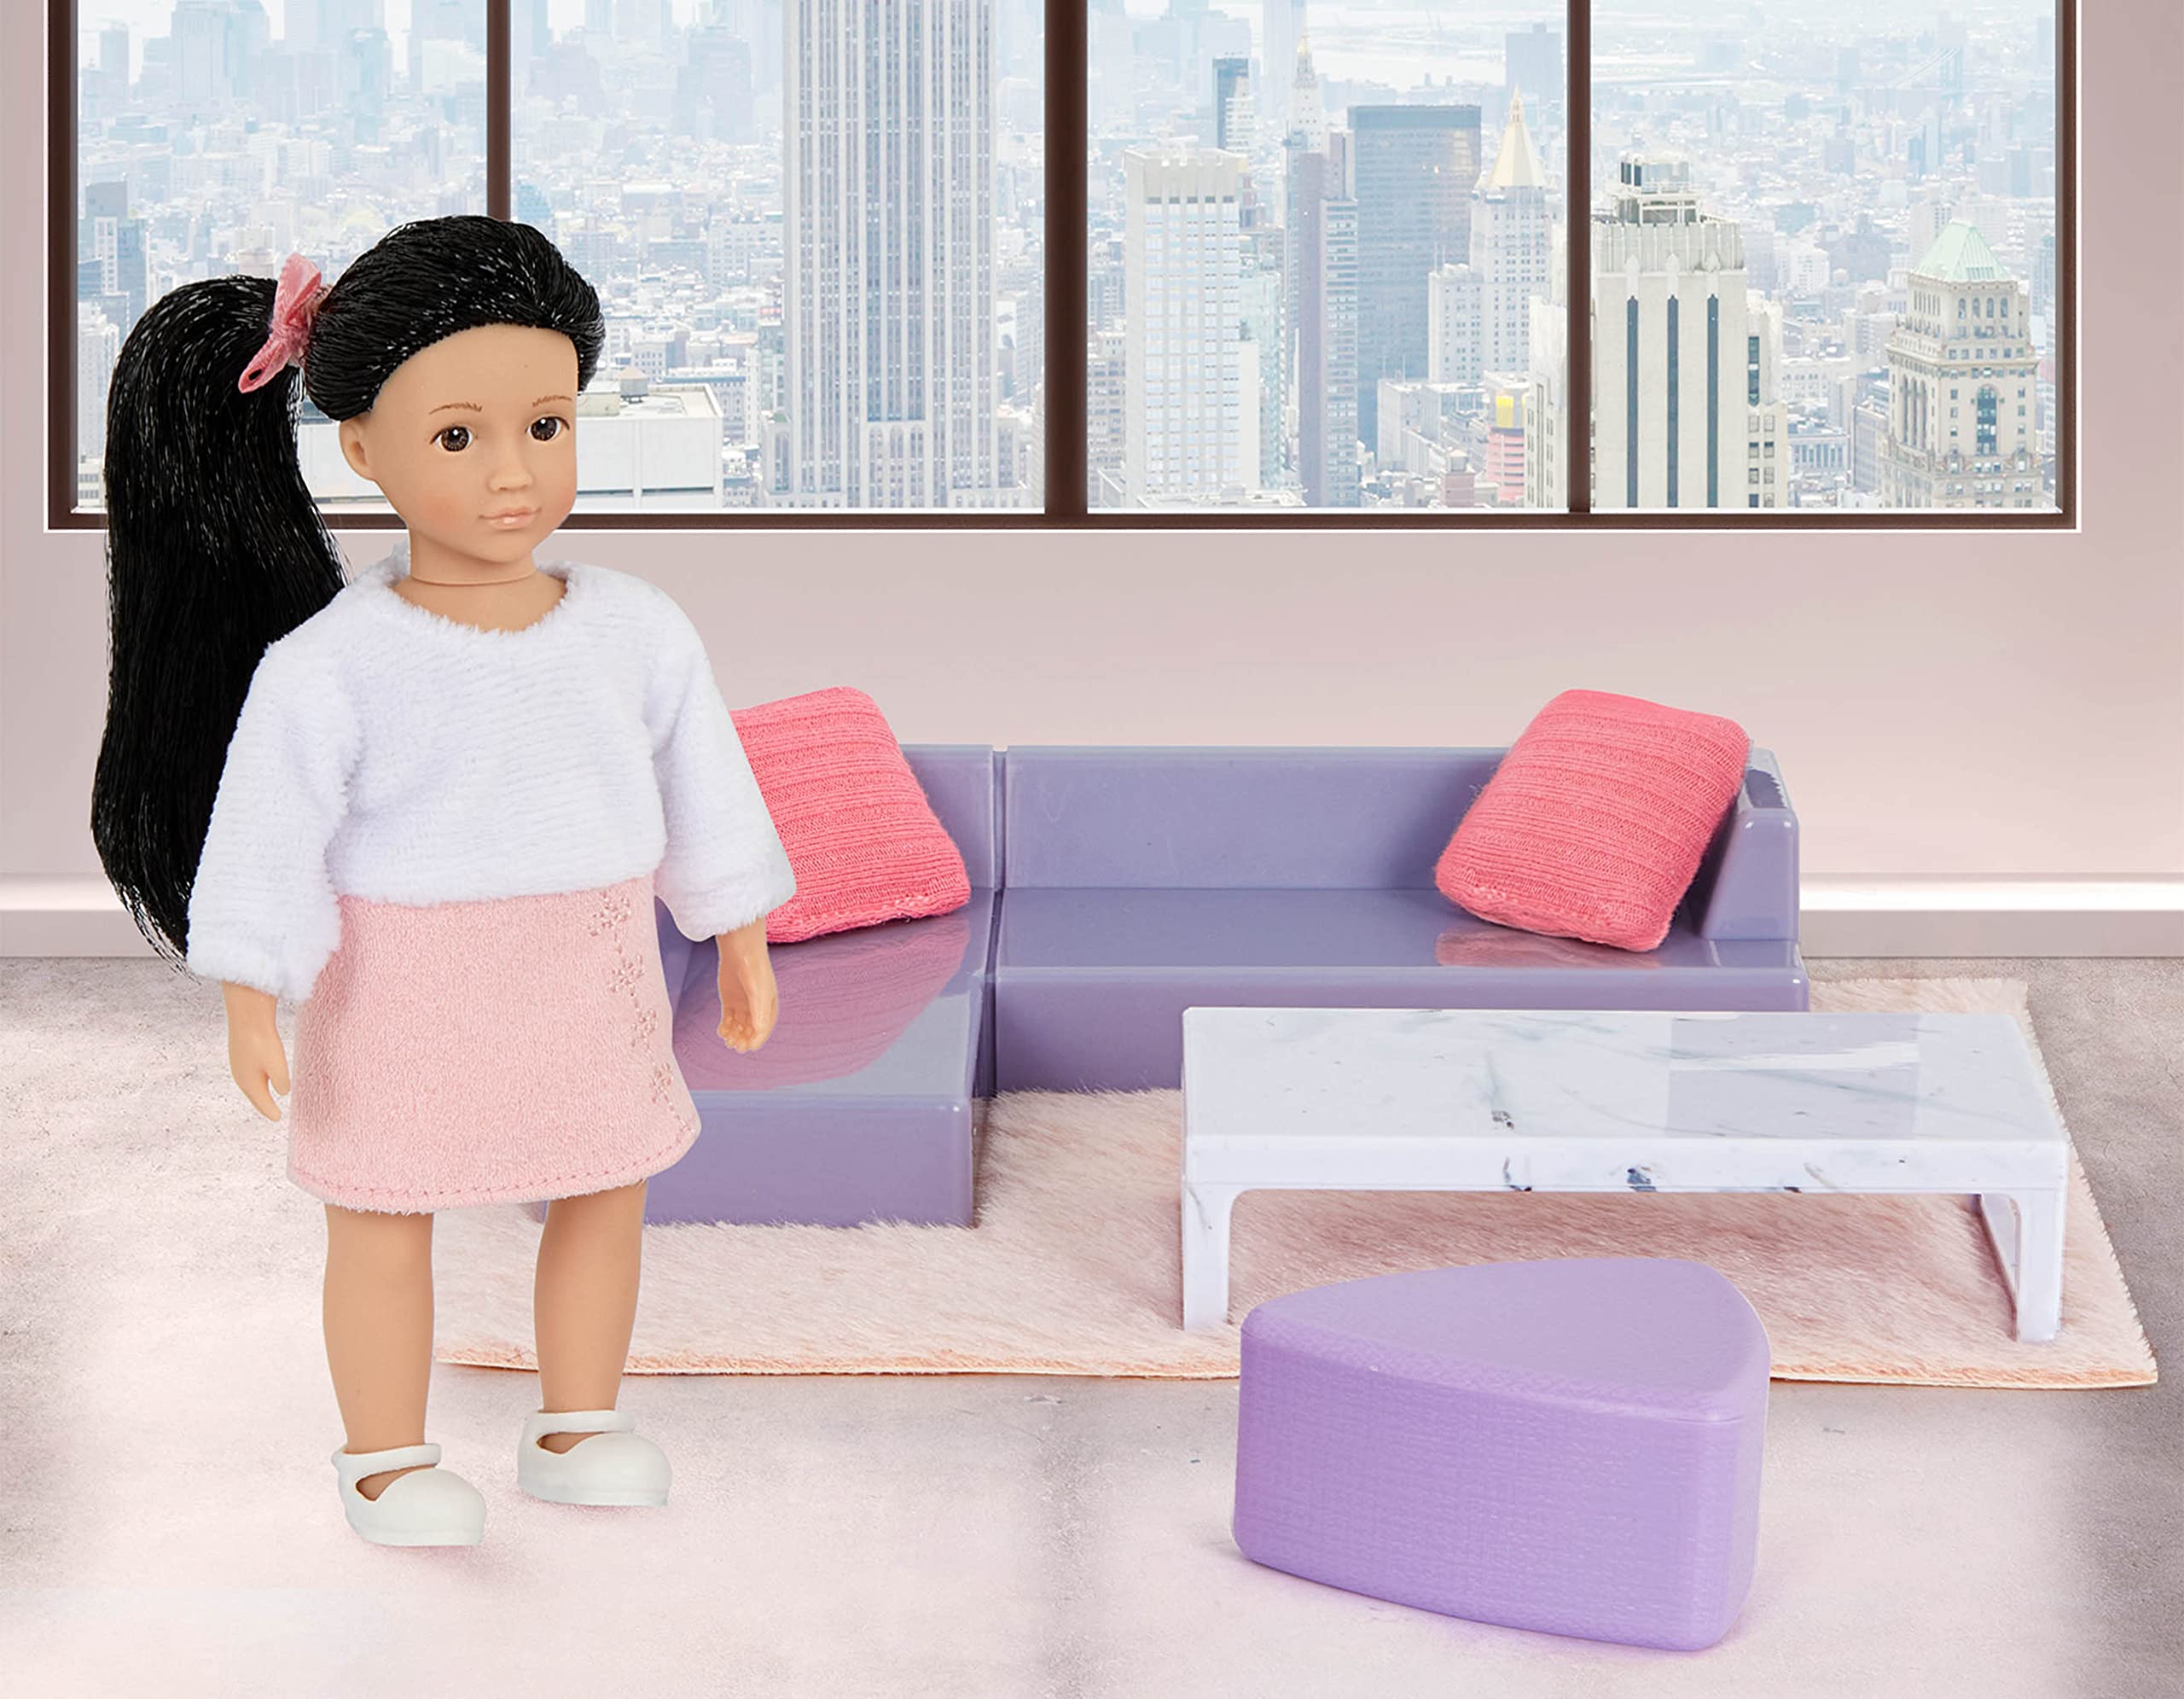 Lori Dolls – Yuni’s Cozy Sofa Set – Mini Doll & Toy Living Room Furniture – 6-inch Doll & Dollhouse Accessories – Sofa, Pouffe, Table, Rug, Pillows – Play Set for Kids – 3 Years +